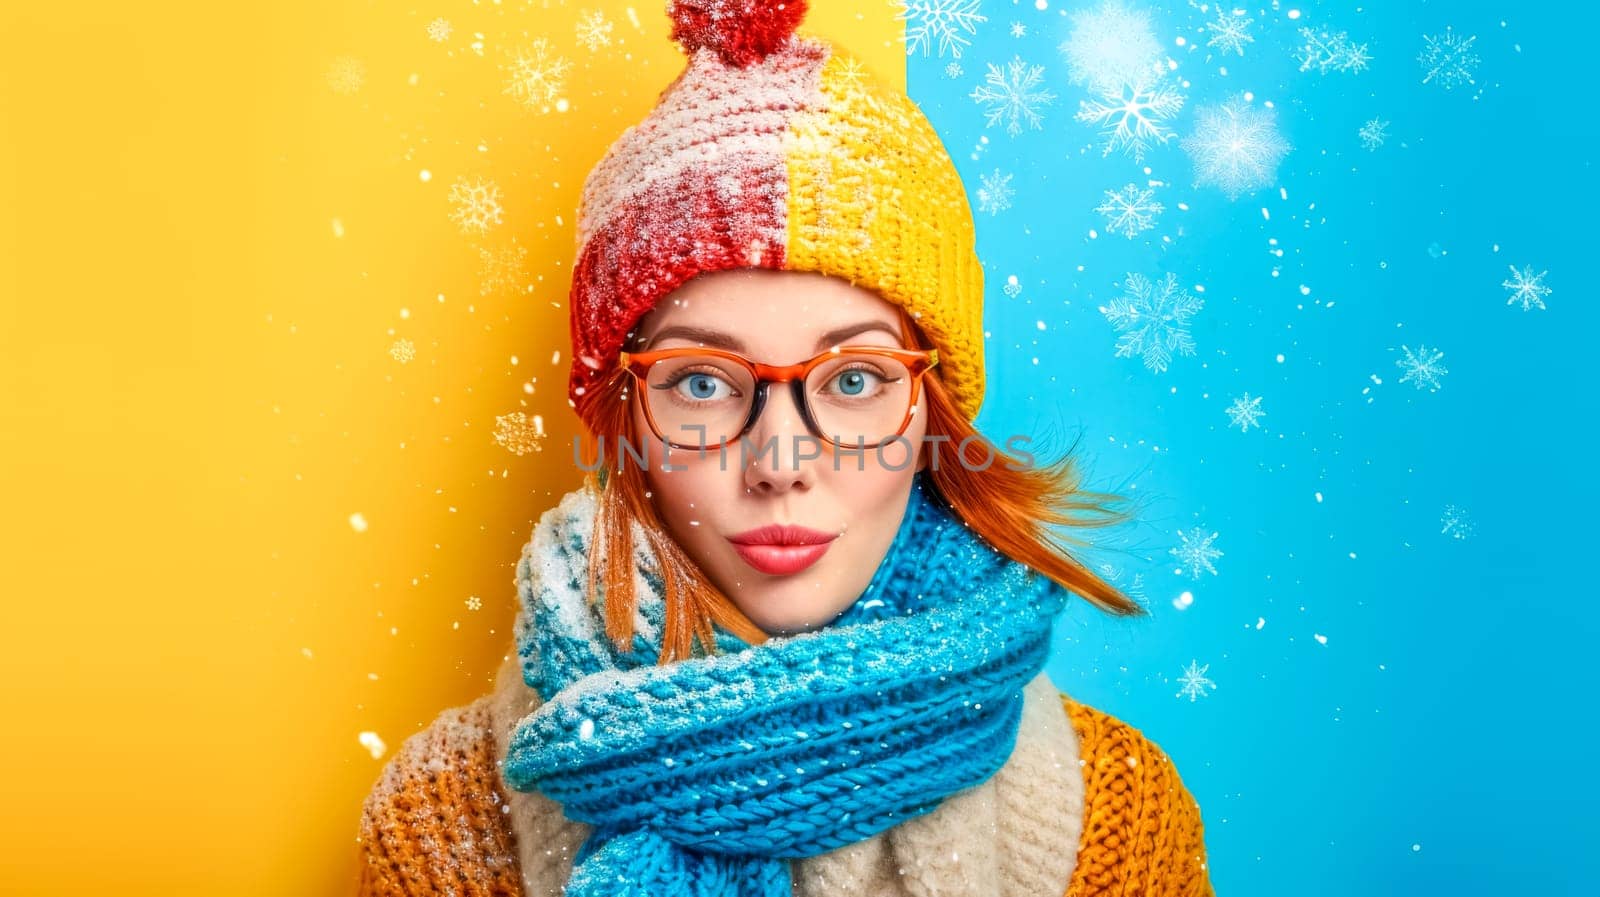 Winter cheer: woman in colorful knitwear with snowflakes by Edophoto